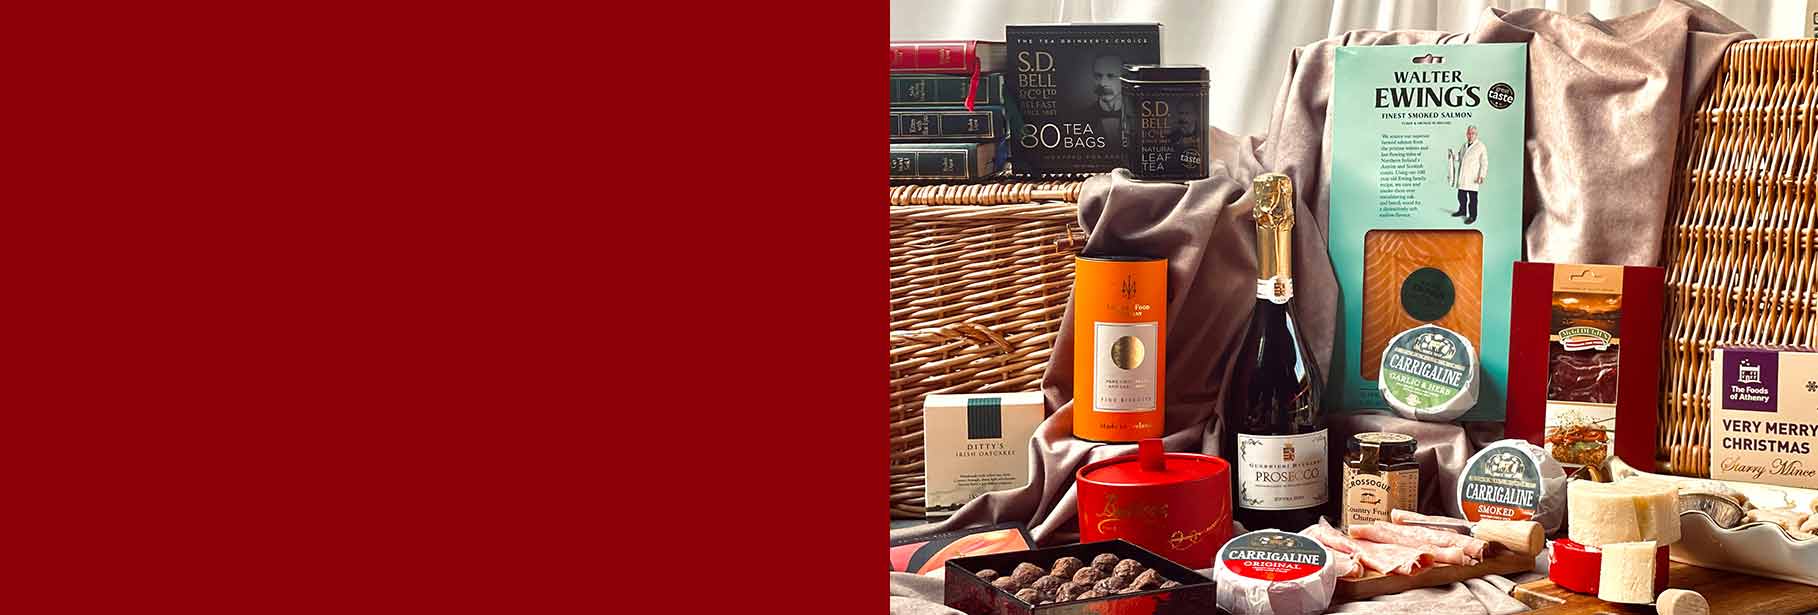 Christmas Hamper Gifts Ready For Pre-order